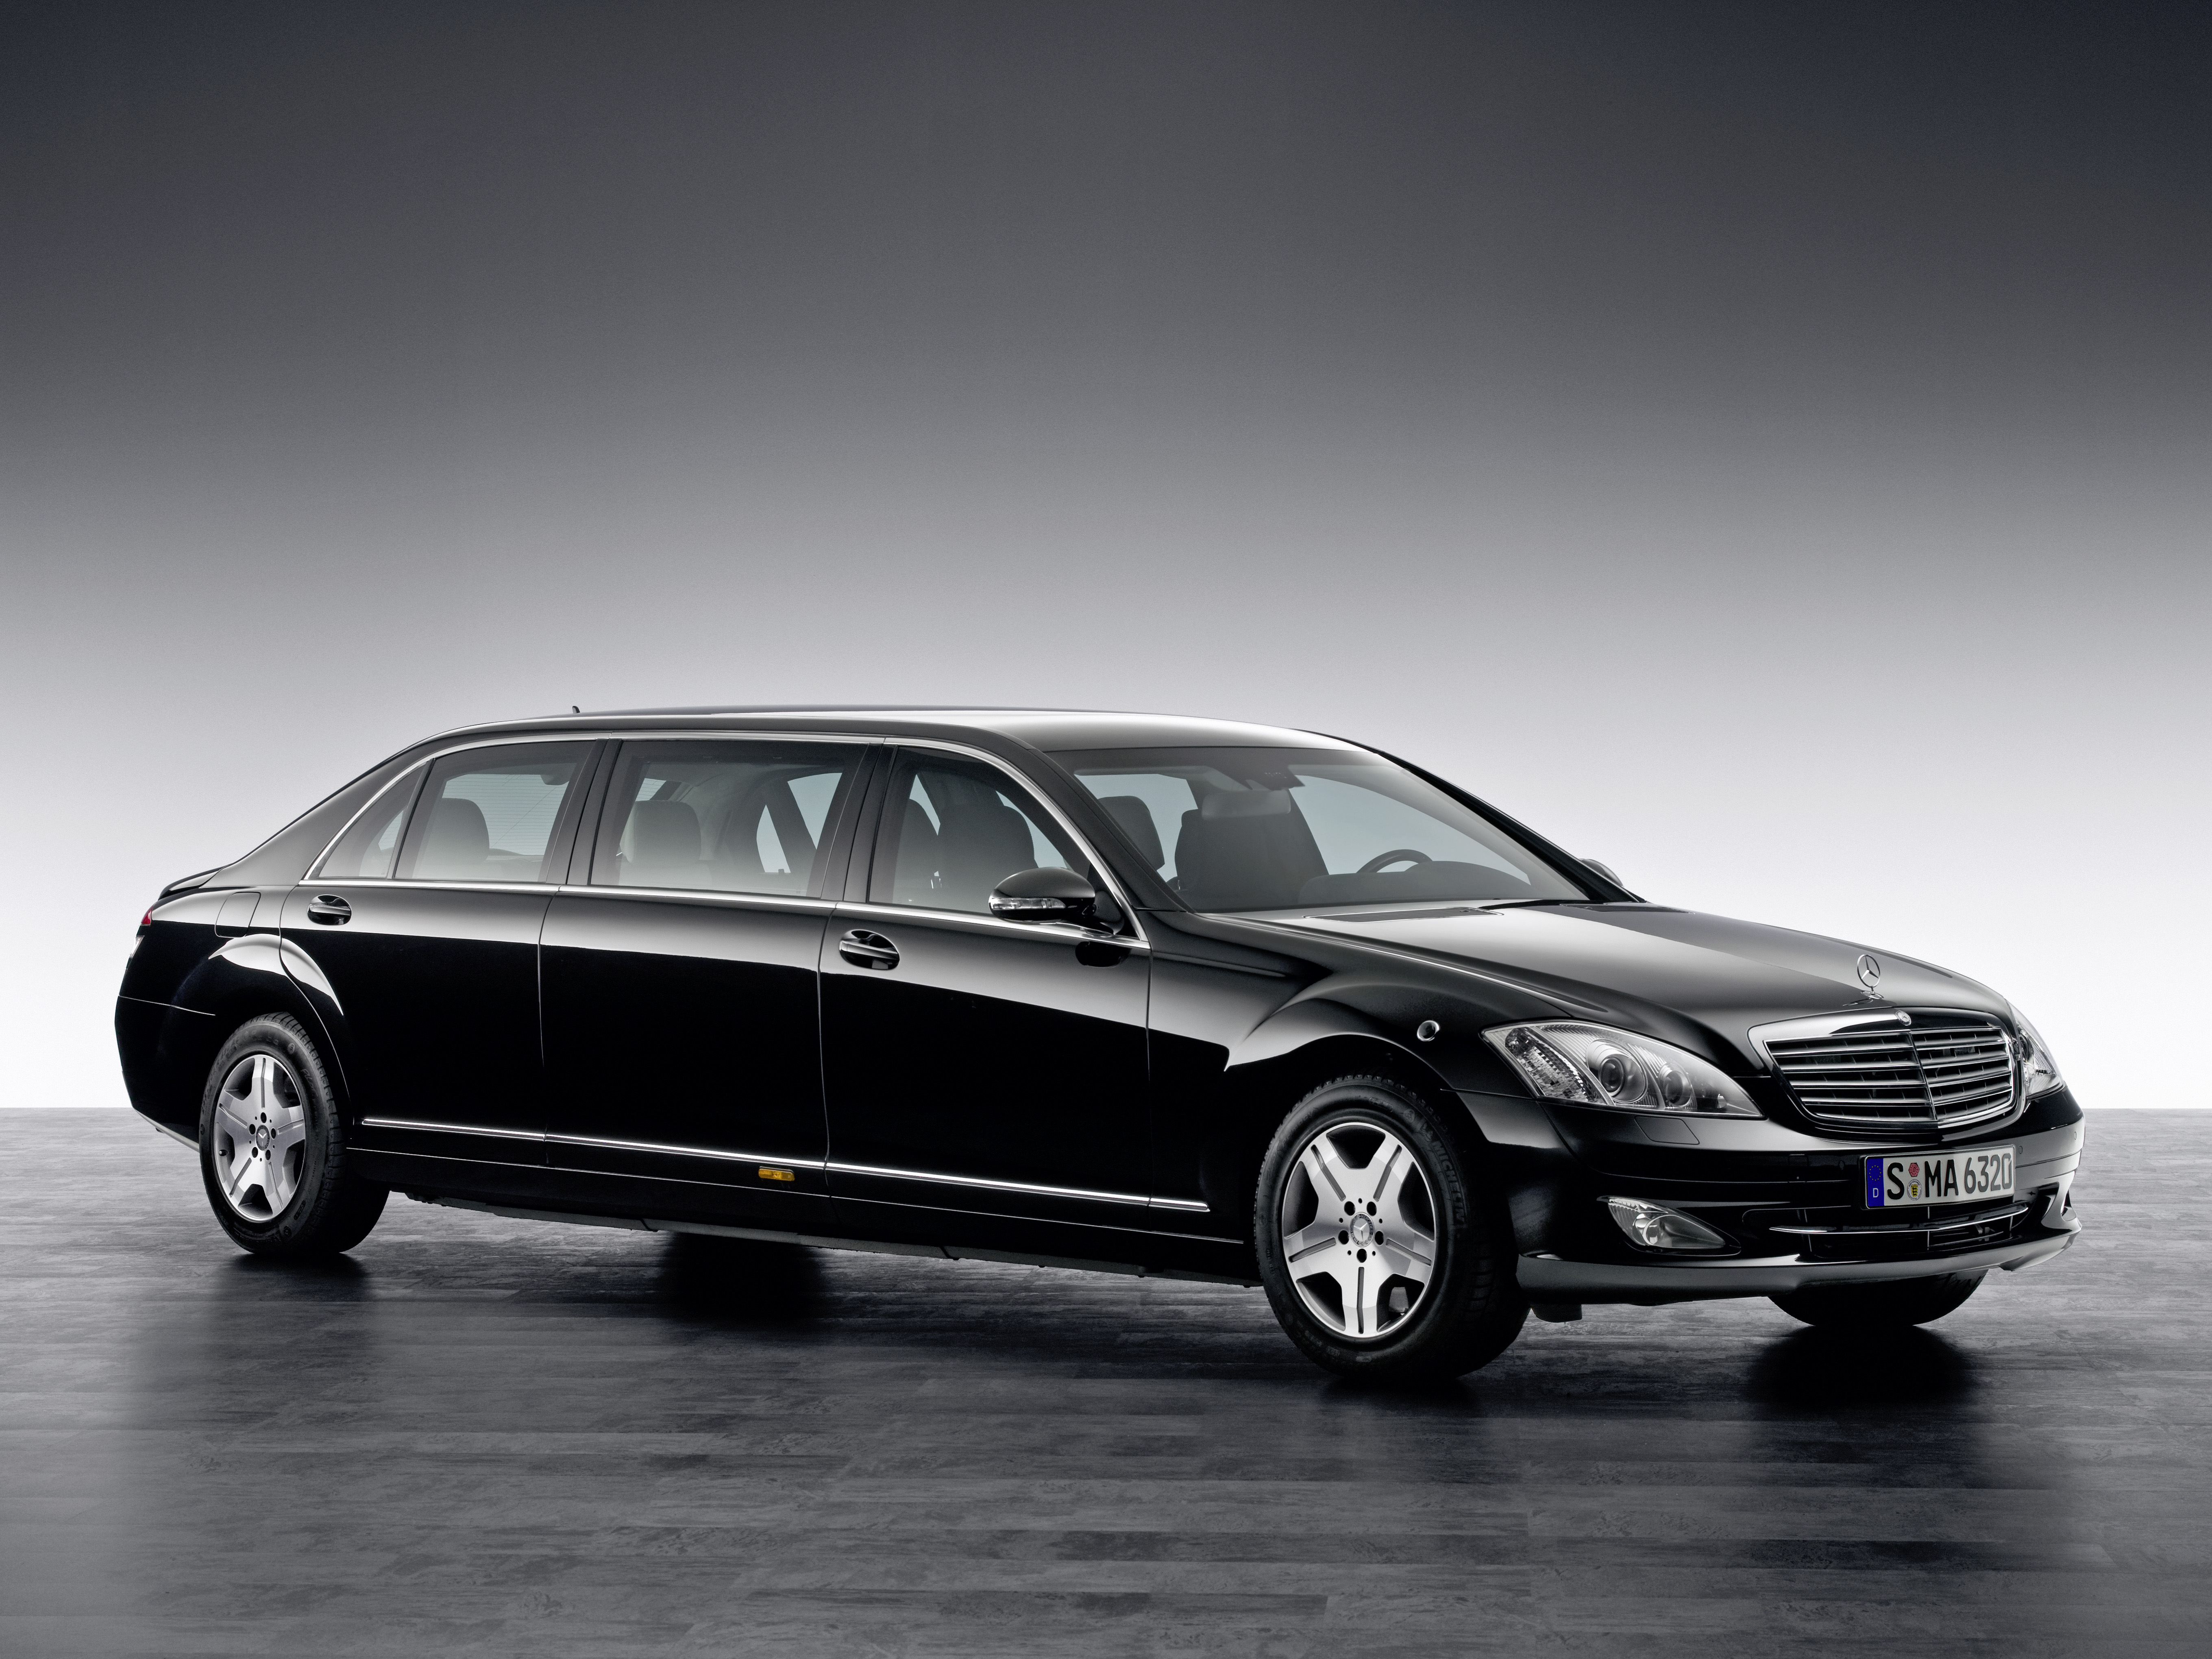 Мерседес s600. Mercedes s600 Pullman Guard. Mercedes Benz s600. Mercedes Benz s600l. Mercedes Pullman s600.